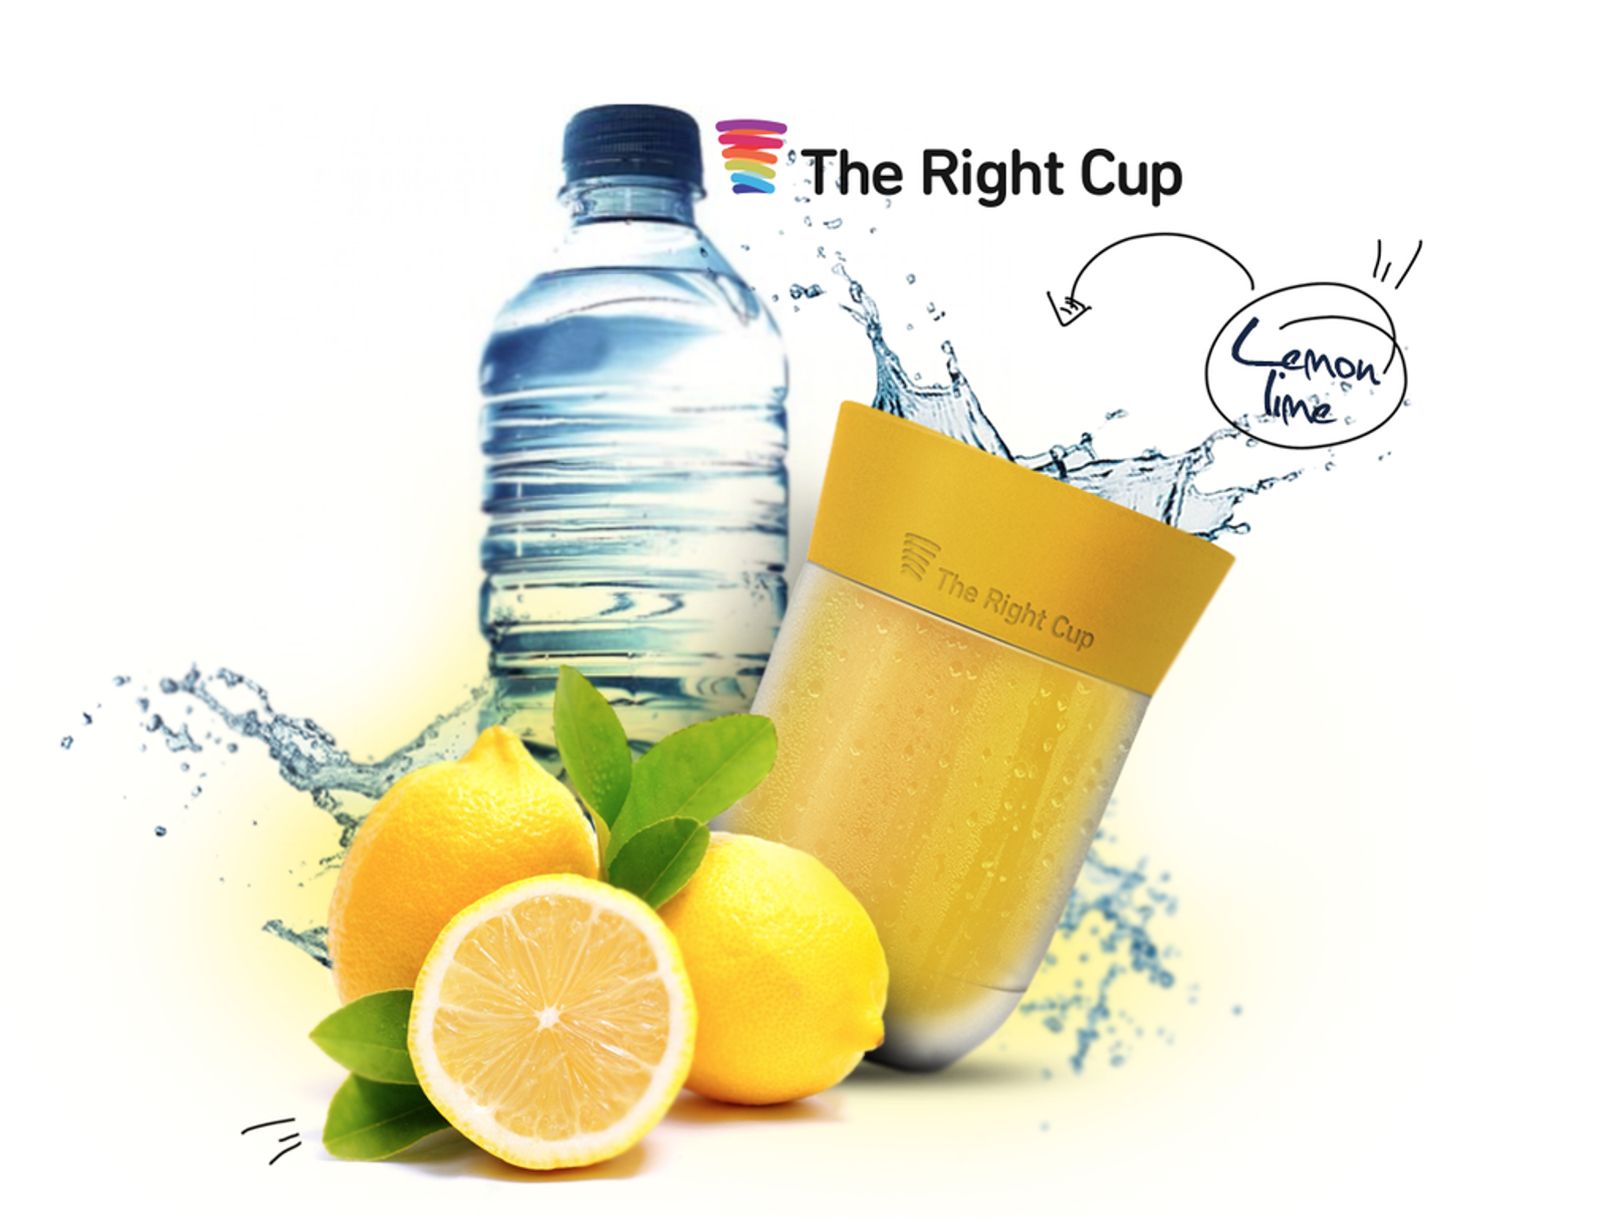  Lemon is one of the first flavors to be infused in The Right Cup. Photo: courtesy